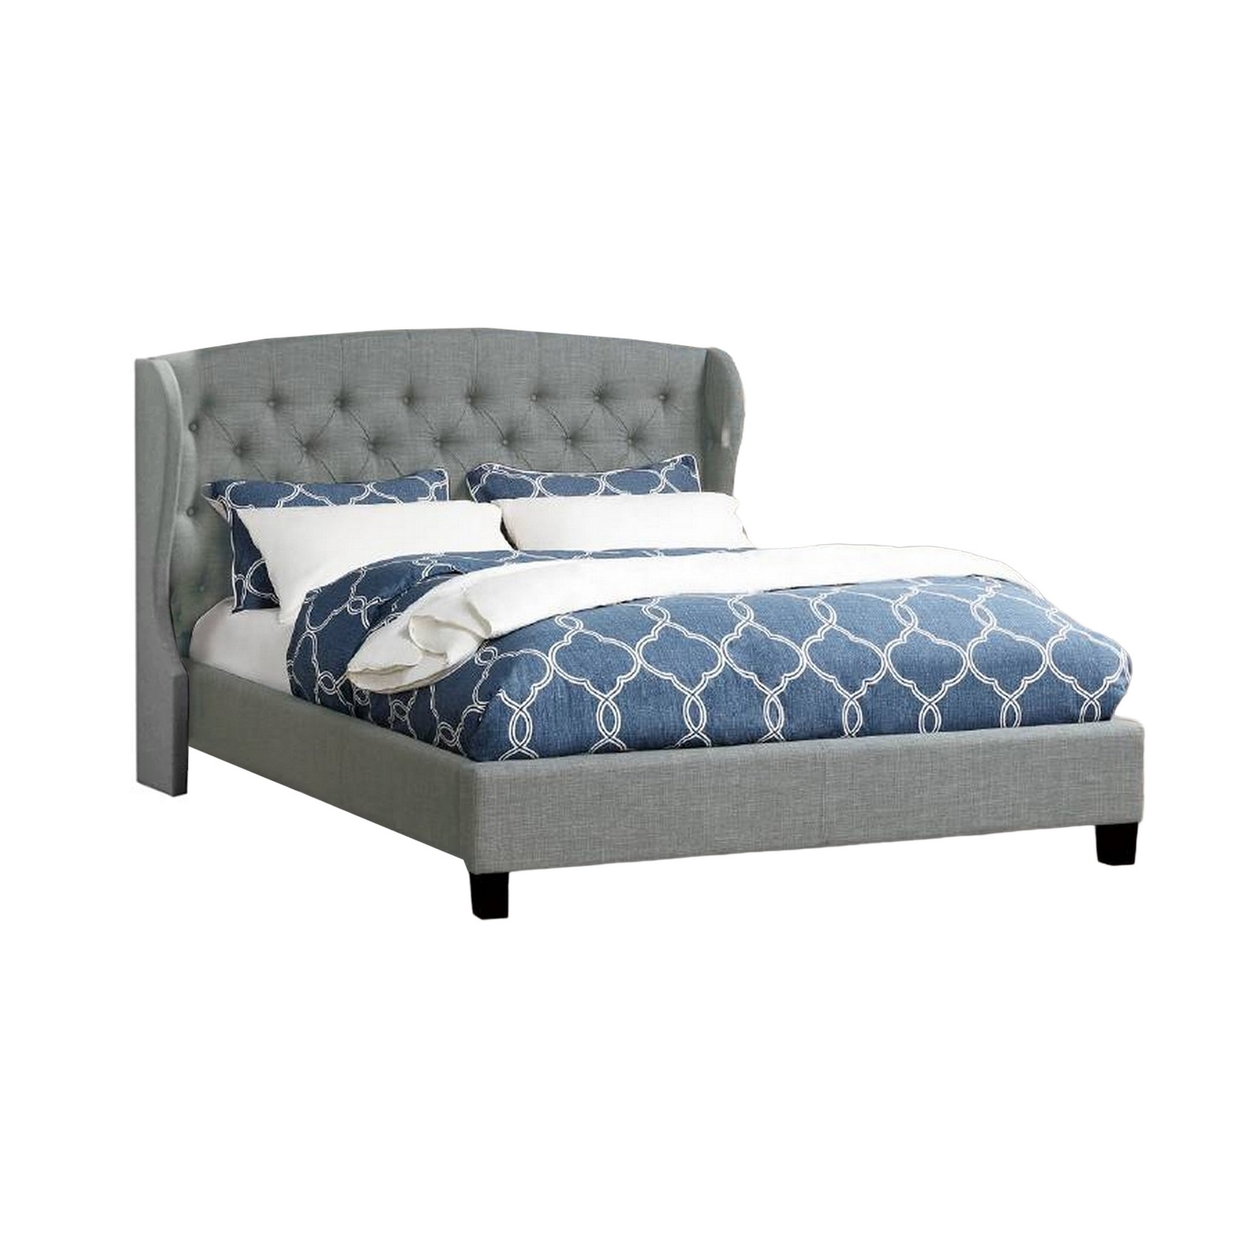 Jimi Queen Bed, Button Tufted Light Gray Polyester Upholstered Headboard- Saltoro Sherpi